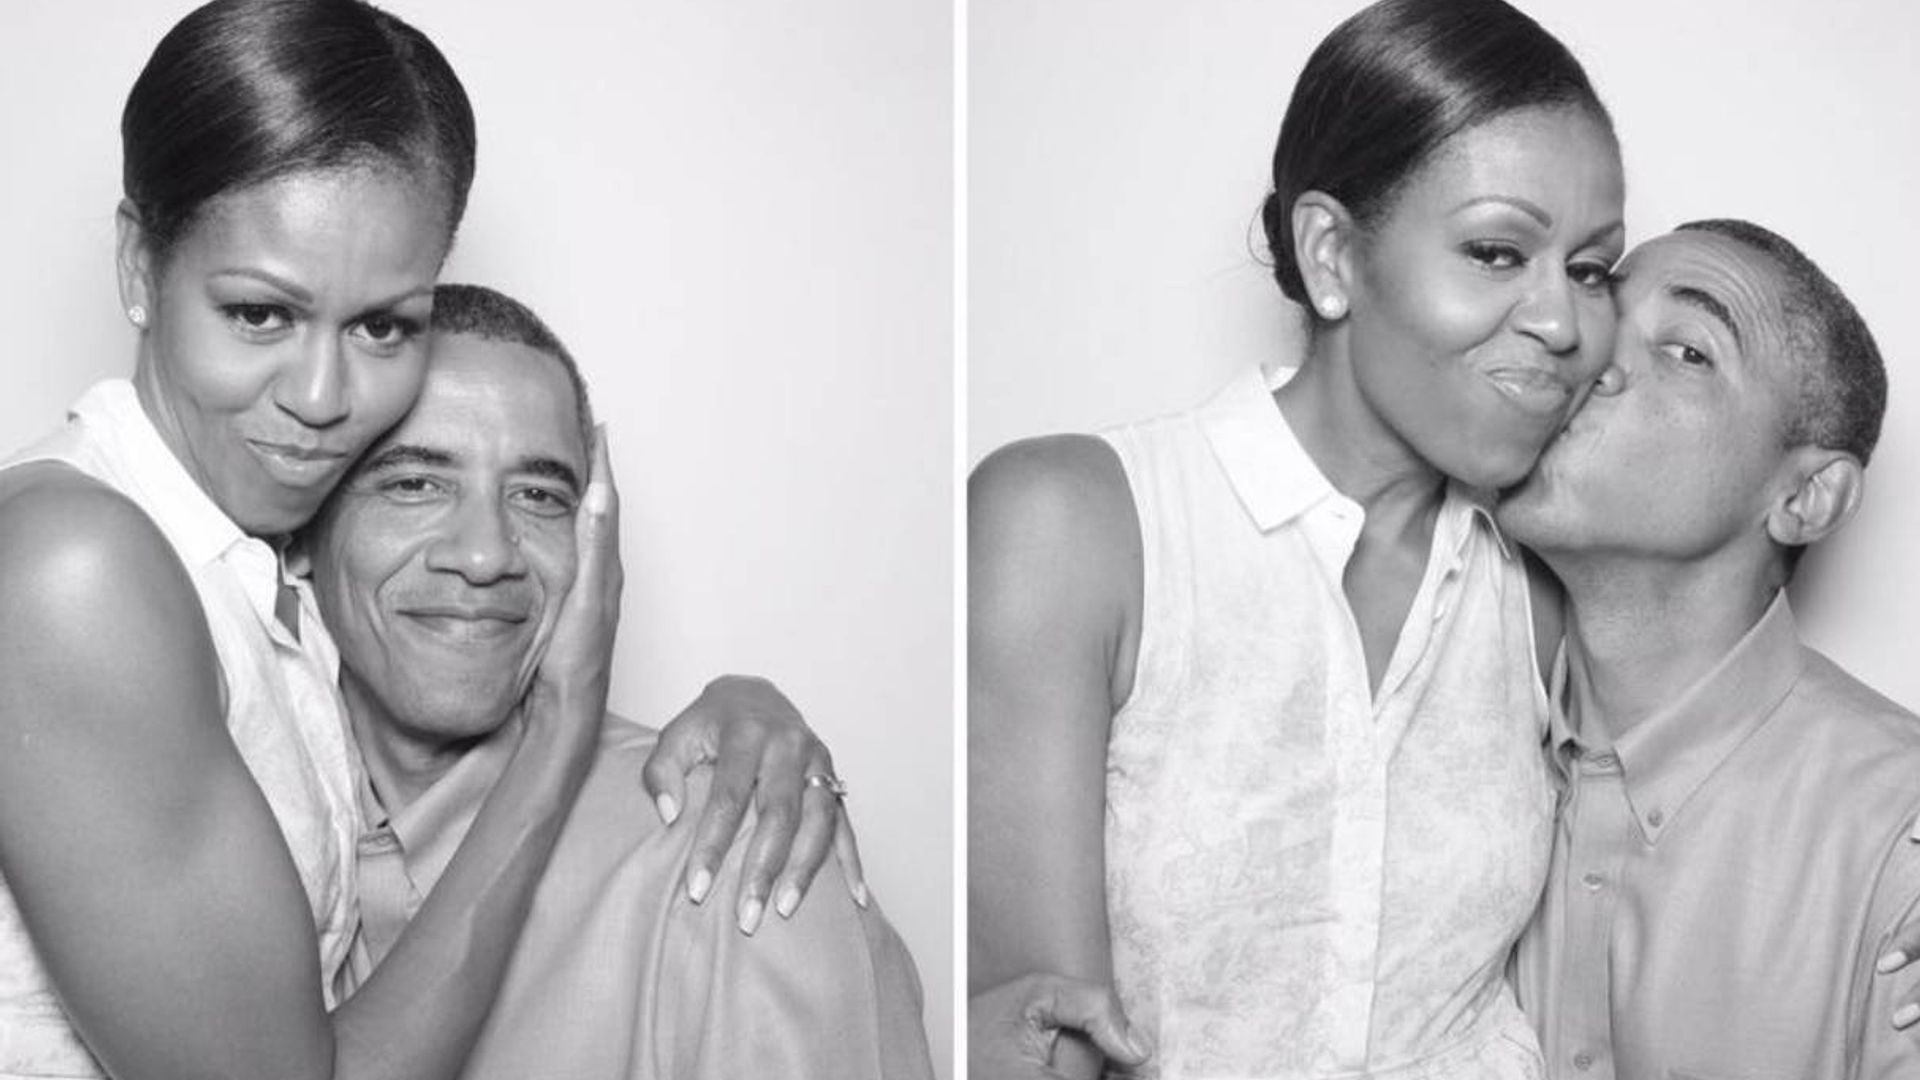 Barack Obama makes surprising revelation about relationship with wife Michelle